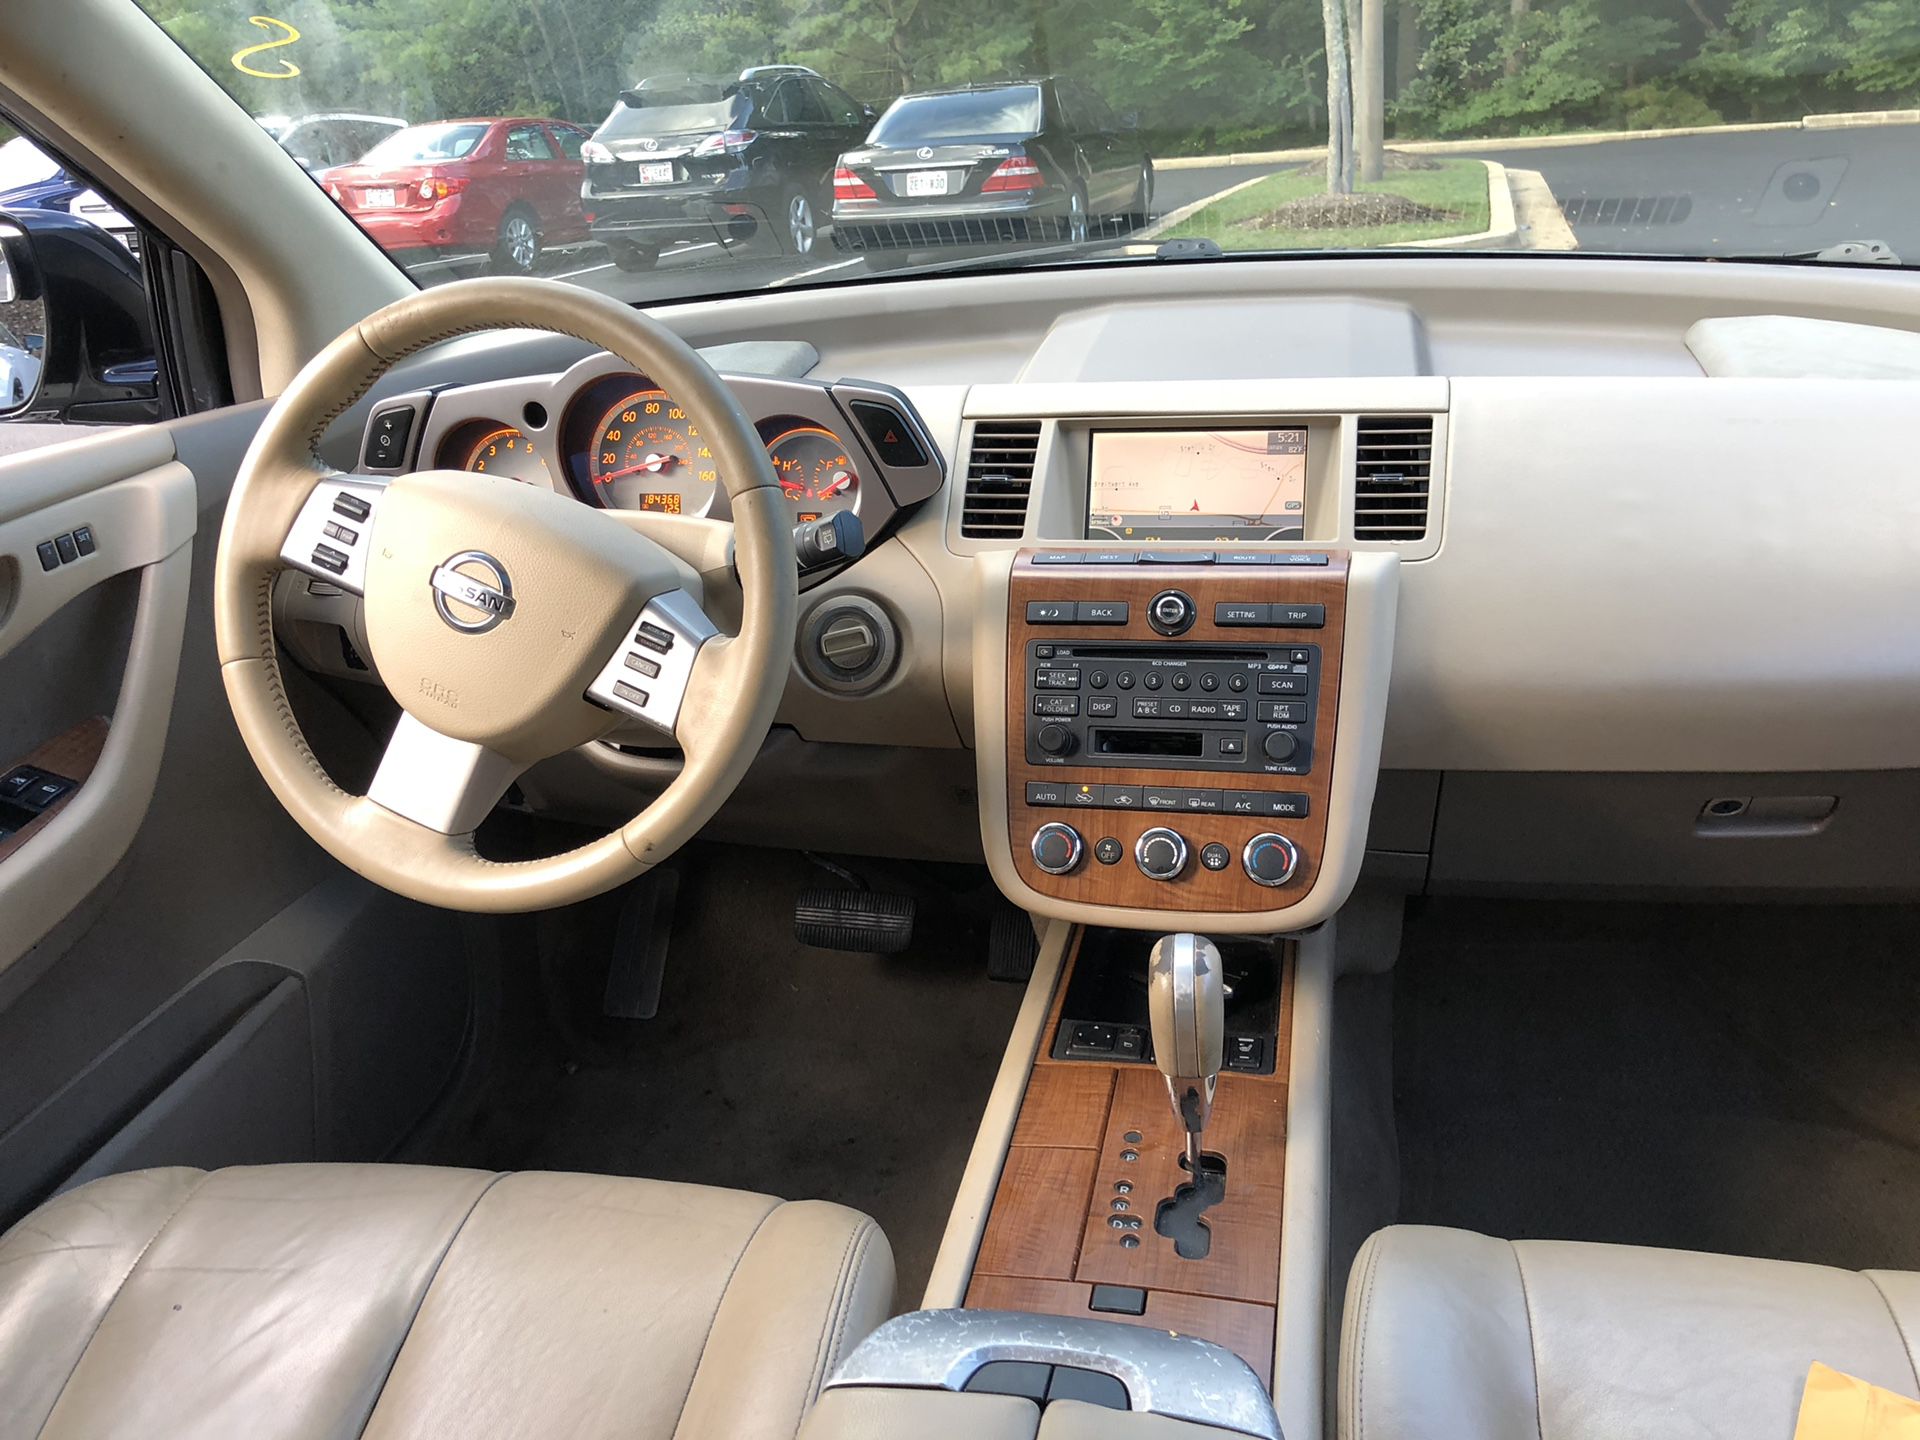 2007 Nissan Murano clean miles 184 price firm $2399